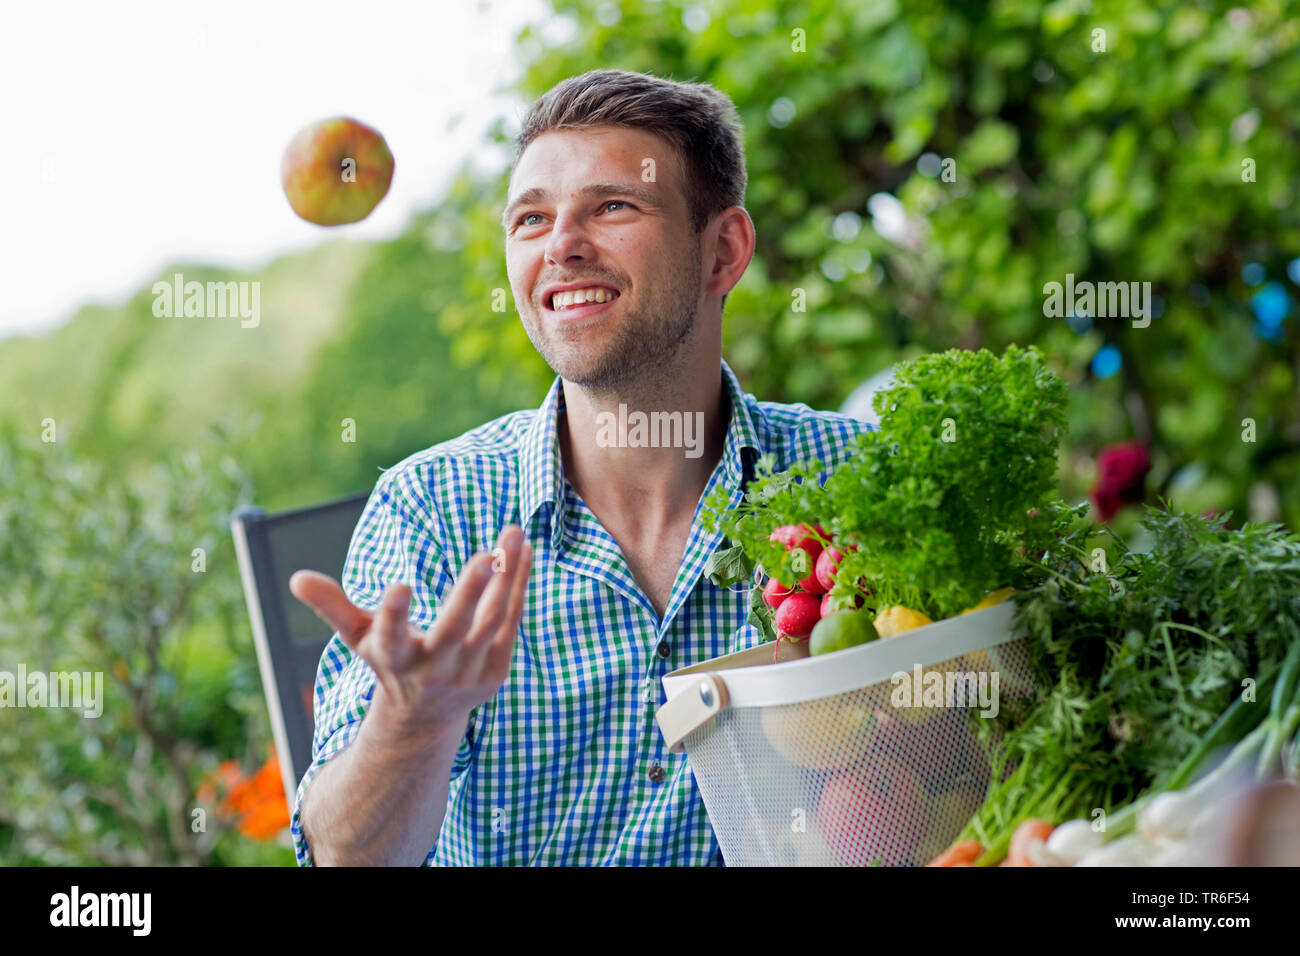 young man throwing up an apple, Germany Stock Photo